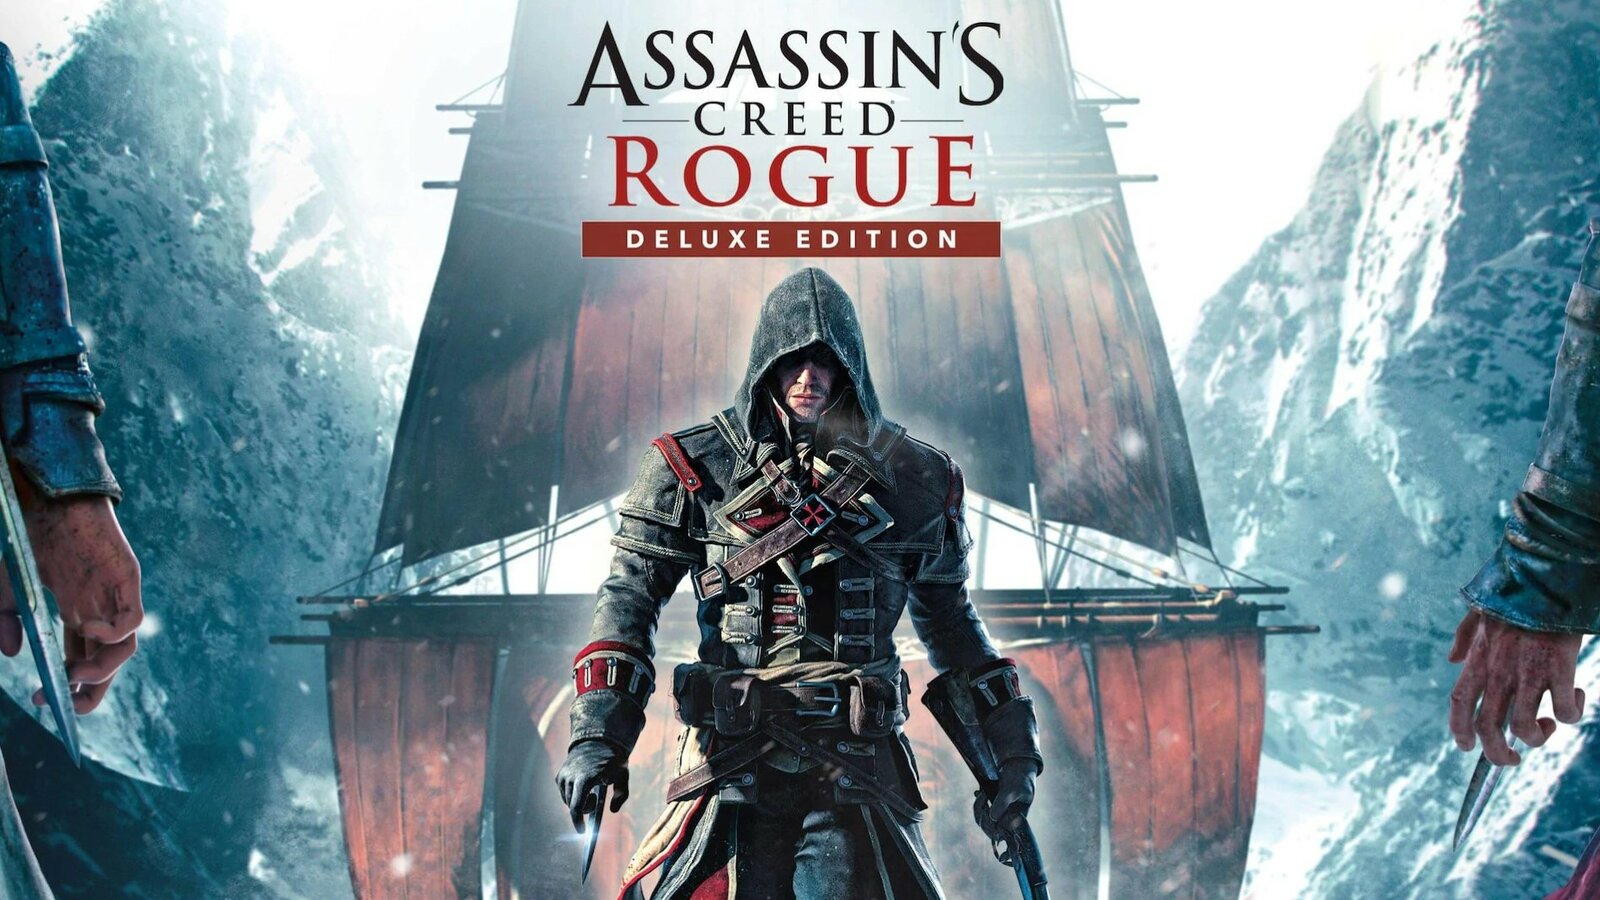 Assassin’s Creed: Rogue - Deluxe Edition